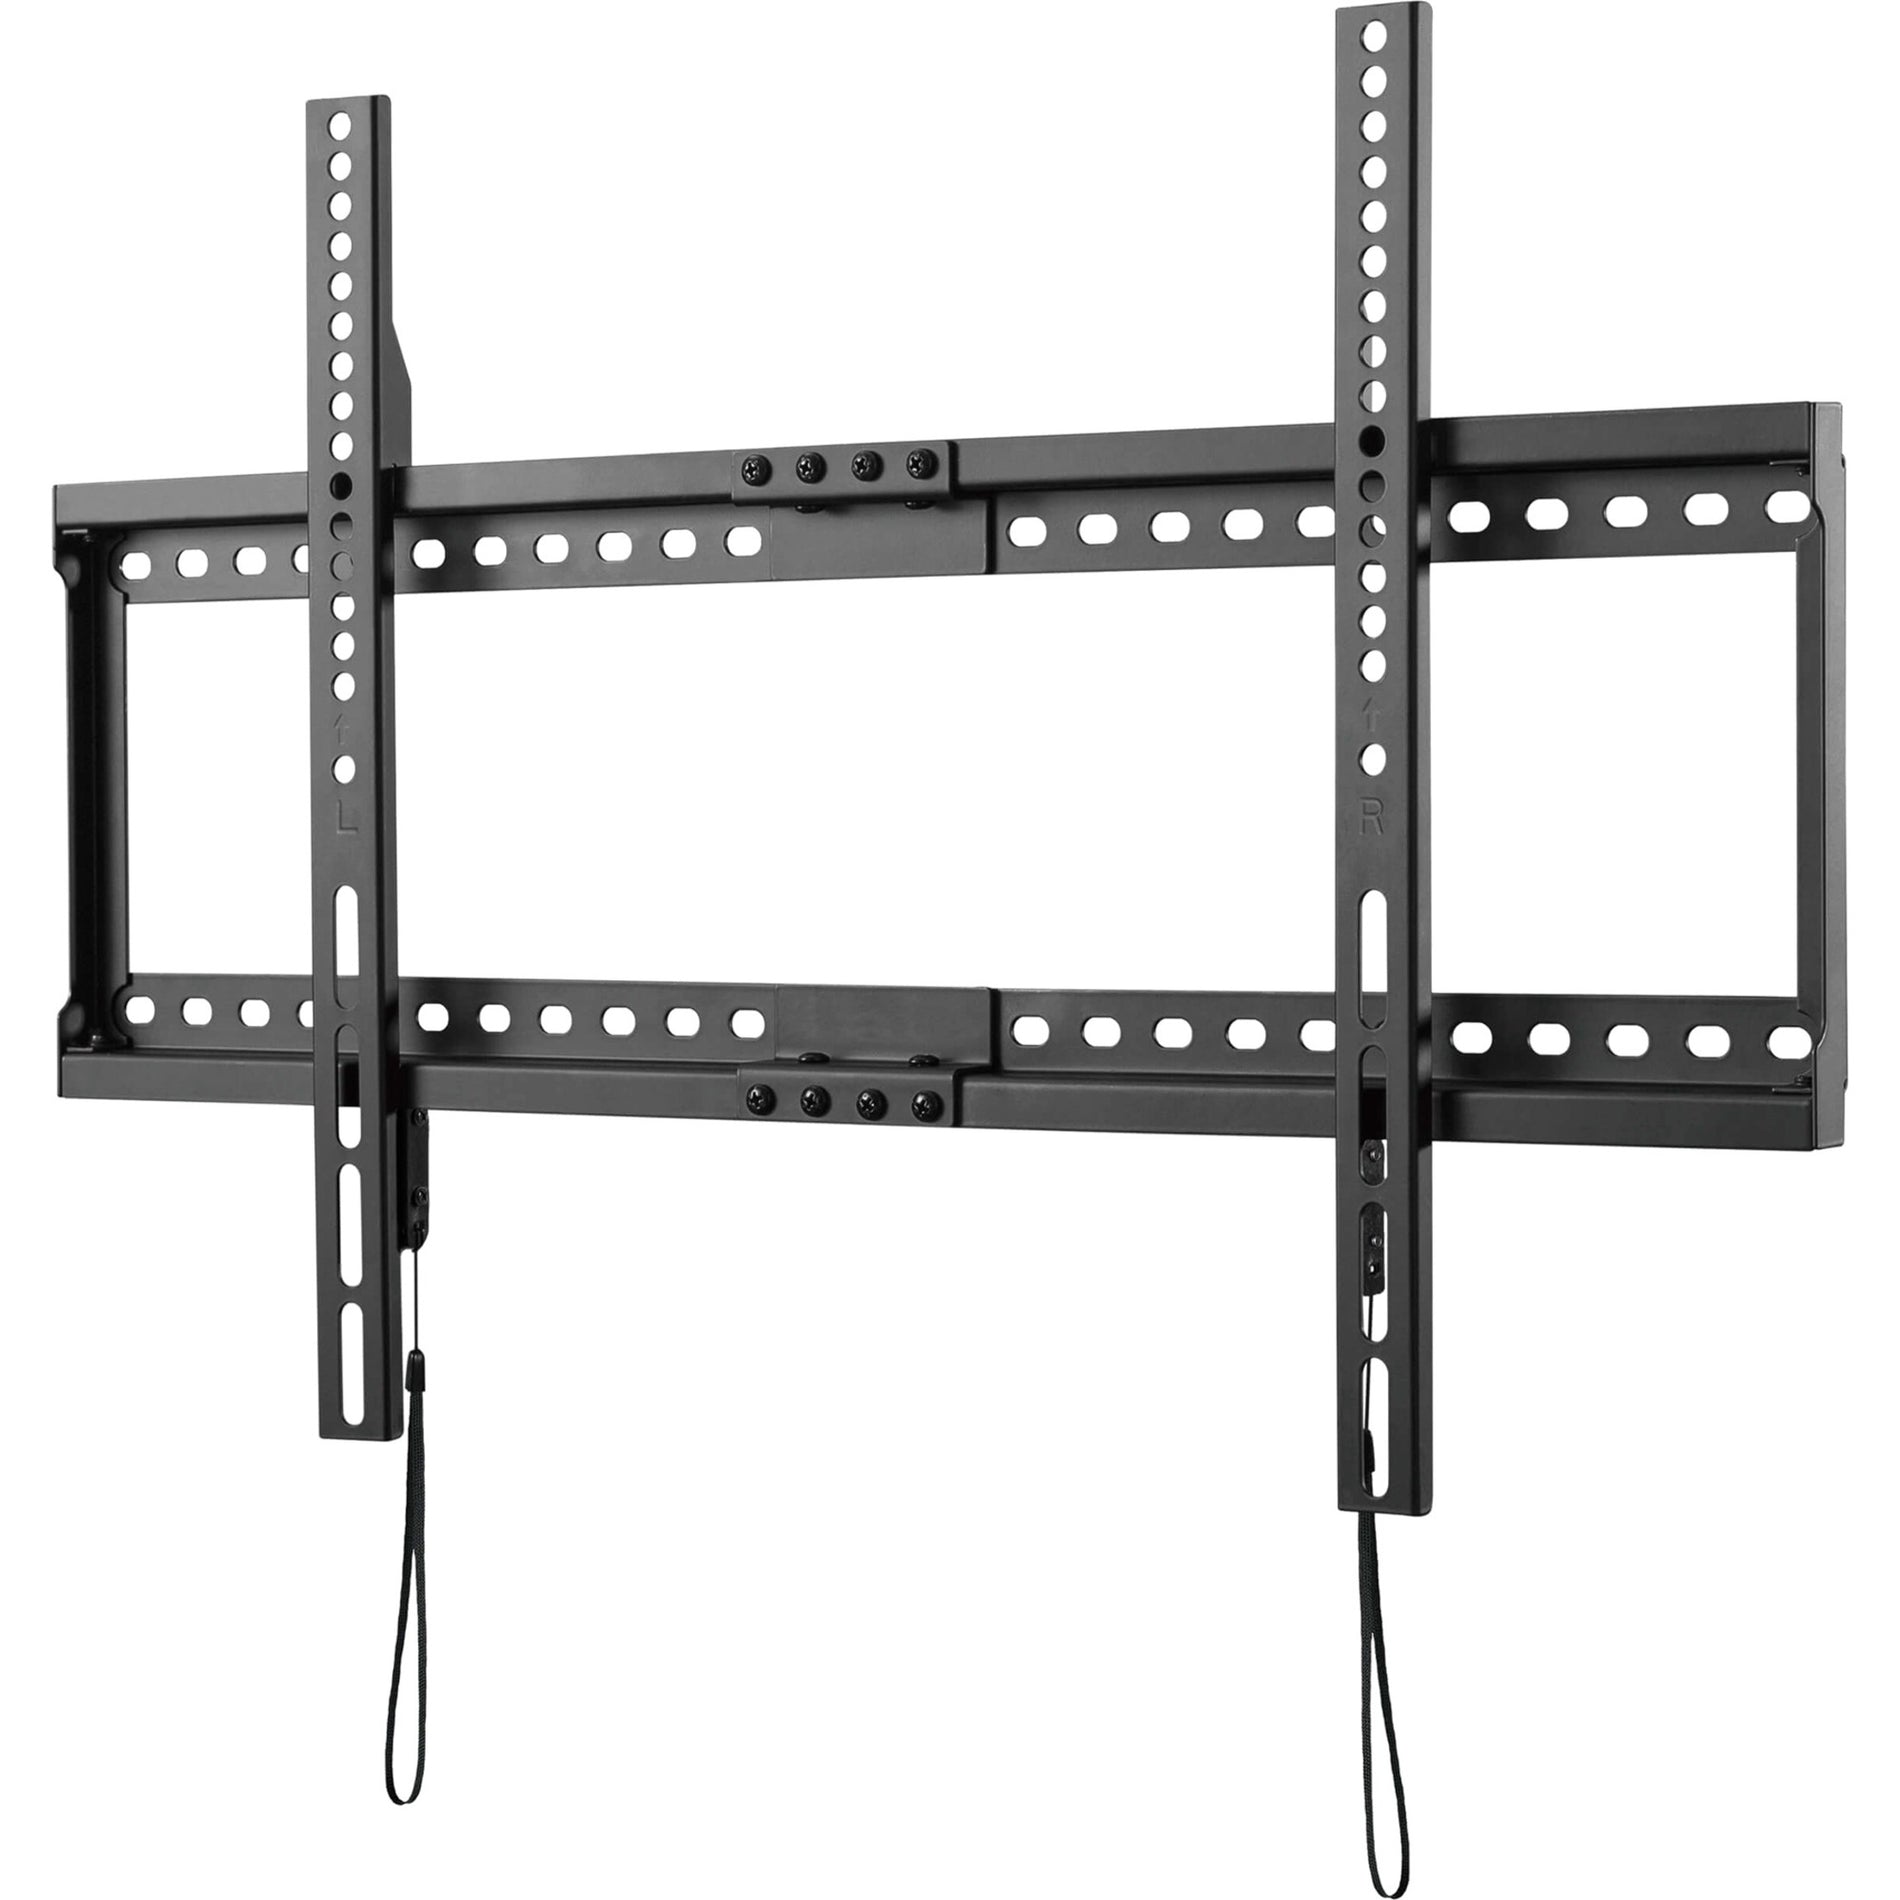 Tripp Lite DWF3780X Fixed TV Wall Mount for 37" to 80" Displays, Low Profile, 165 lb Load Capacity